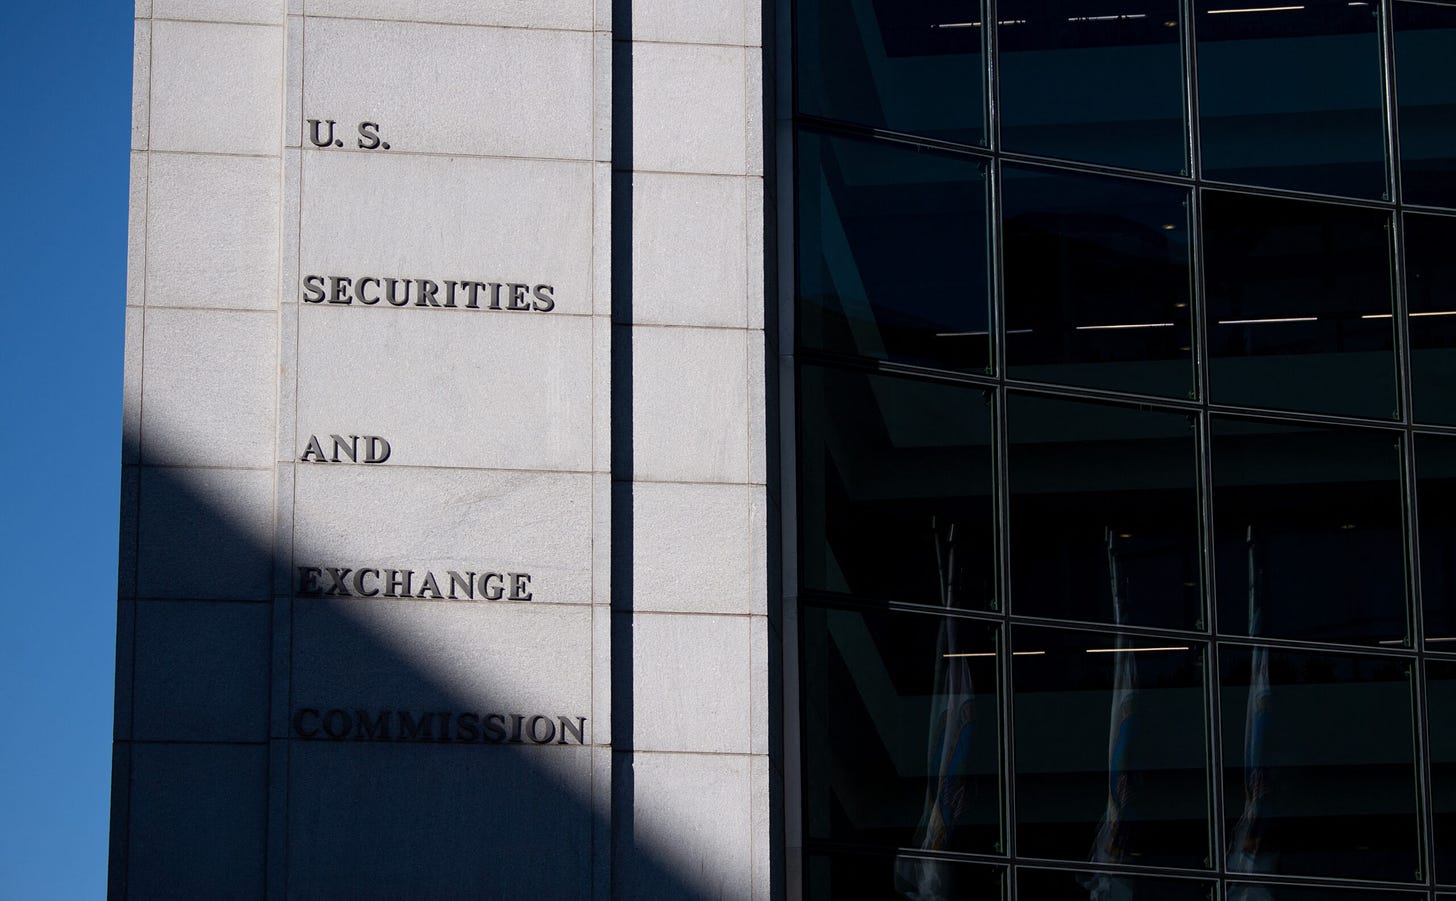 The headquarters of the US Securities and Exchange Commission (SEC) is seen in Washington, D.C., on Jan. 28, 2021. Credit: Saul Loeb/AFP via Getty Images